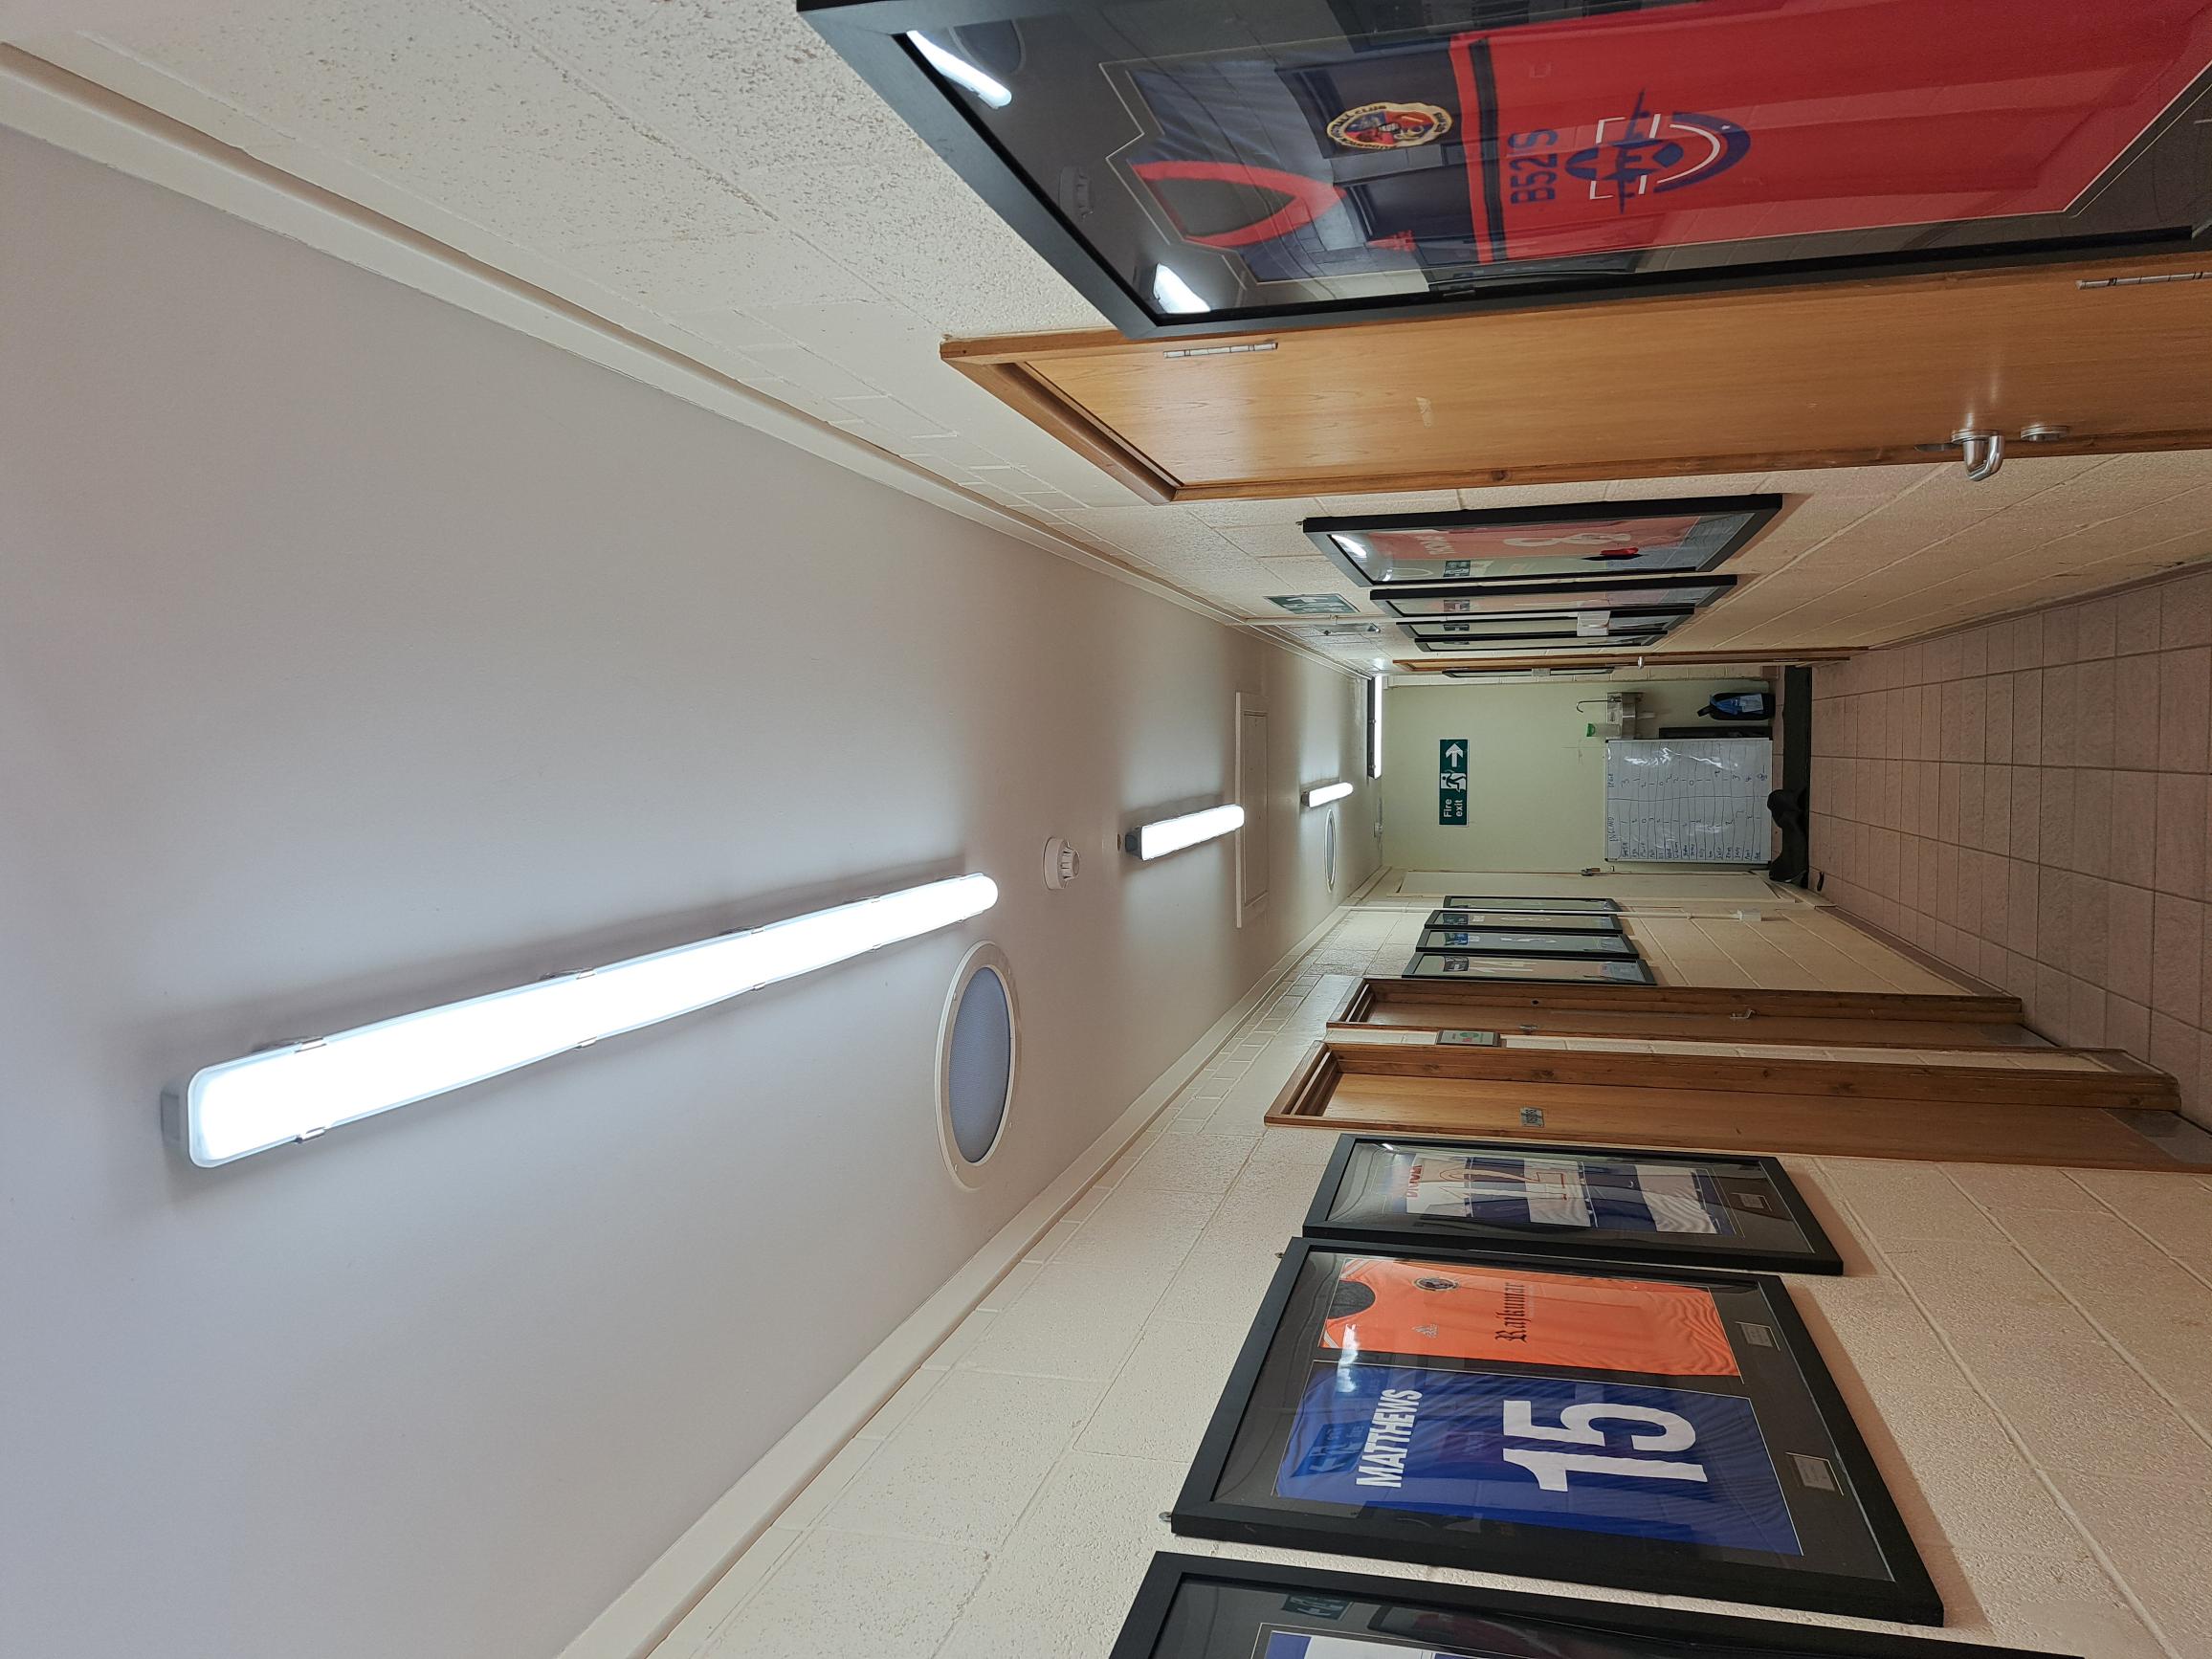 Picture of the LED lights in the hallway